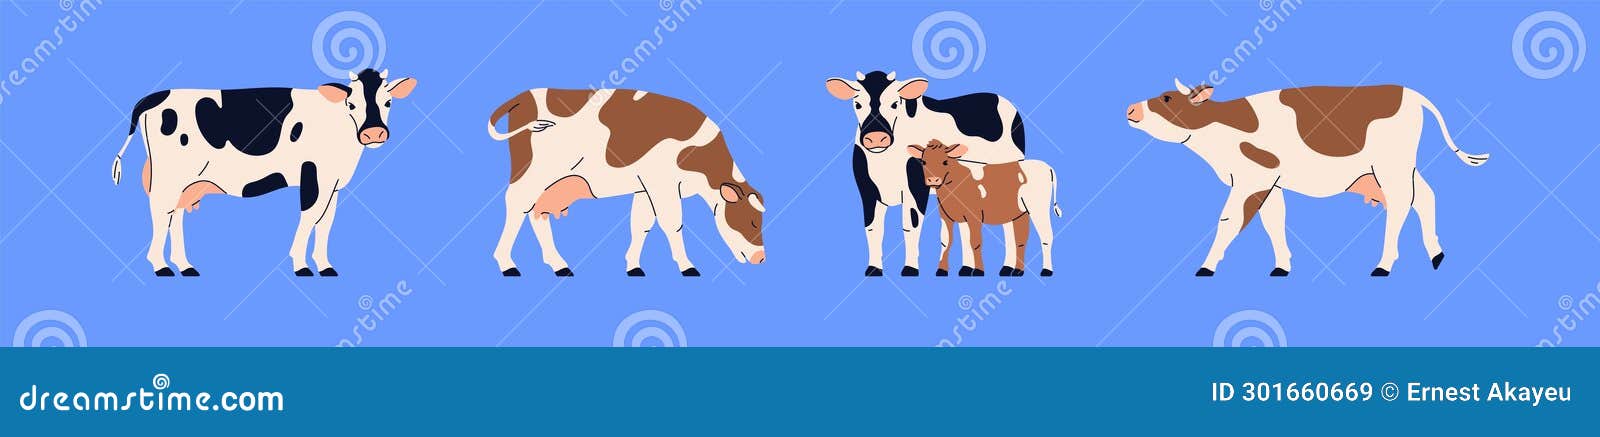 milk dairy cows and calf set. farm animal, bovine cattle, livestock with udder and spotted black and brown coat. eating